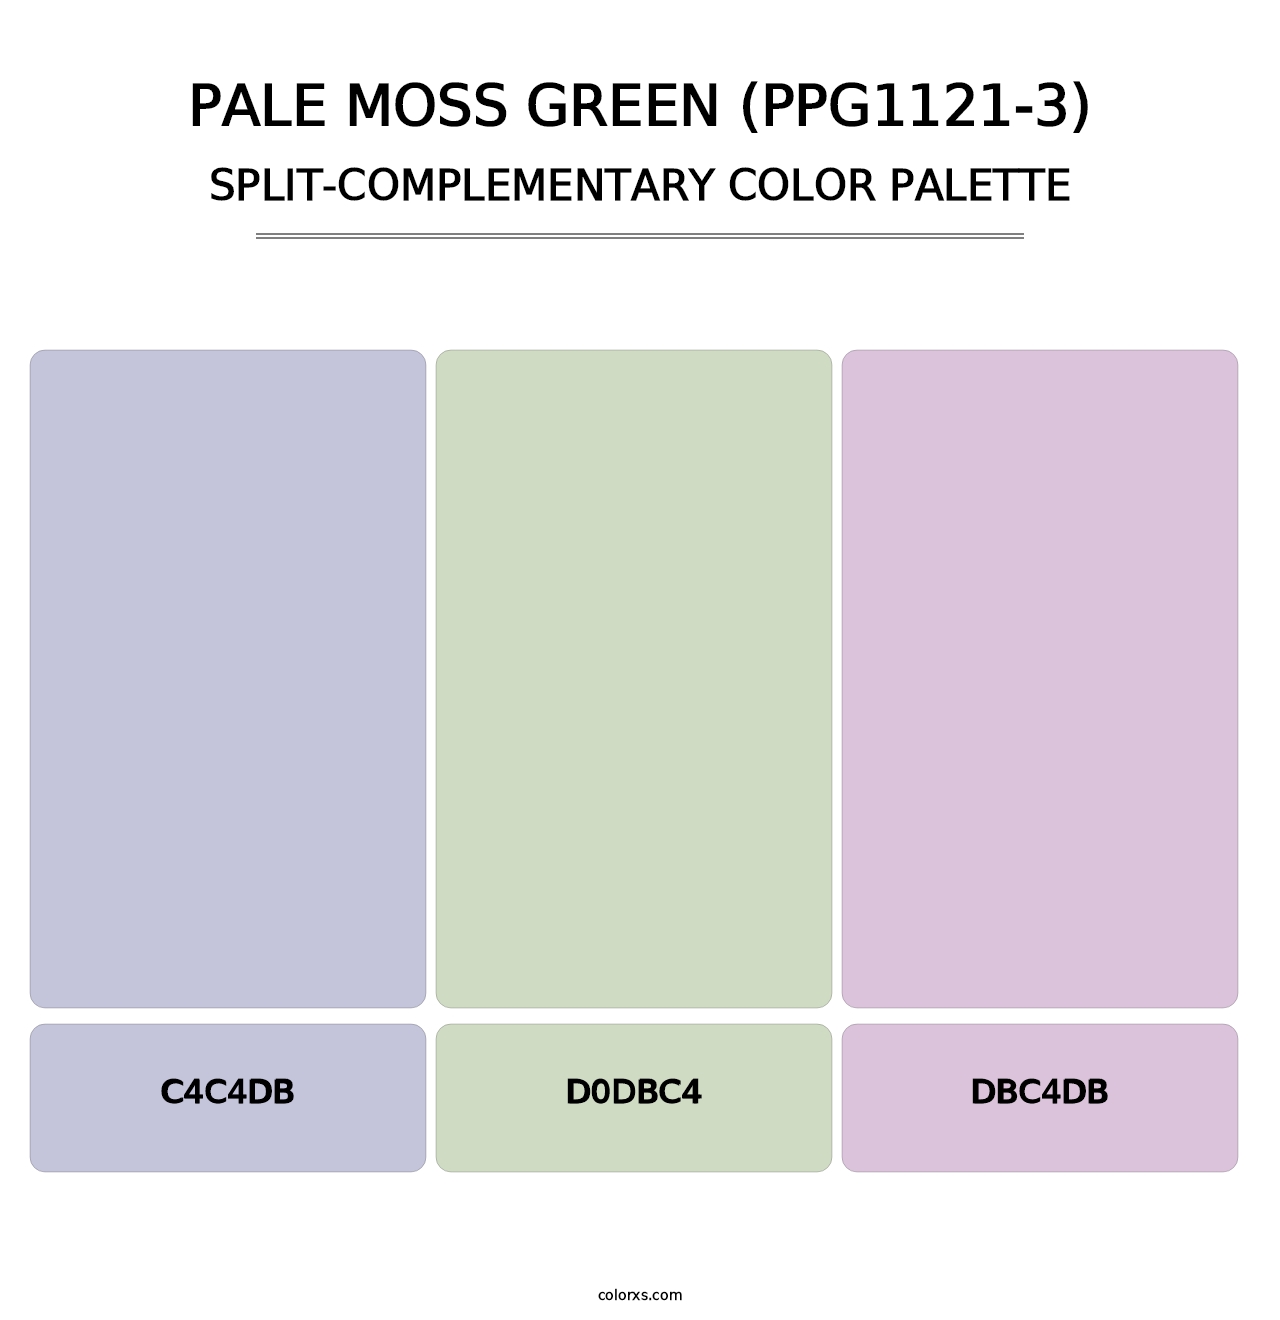 Pale Moss Green (PPG1121-3) - Split-Complementary Color Palette